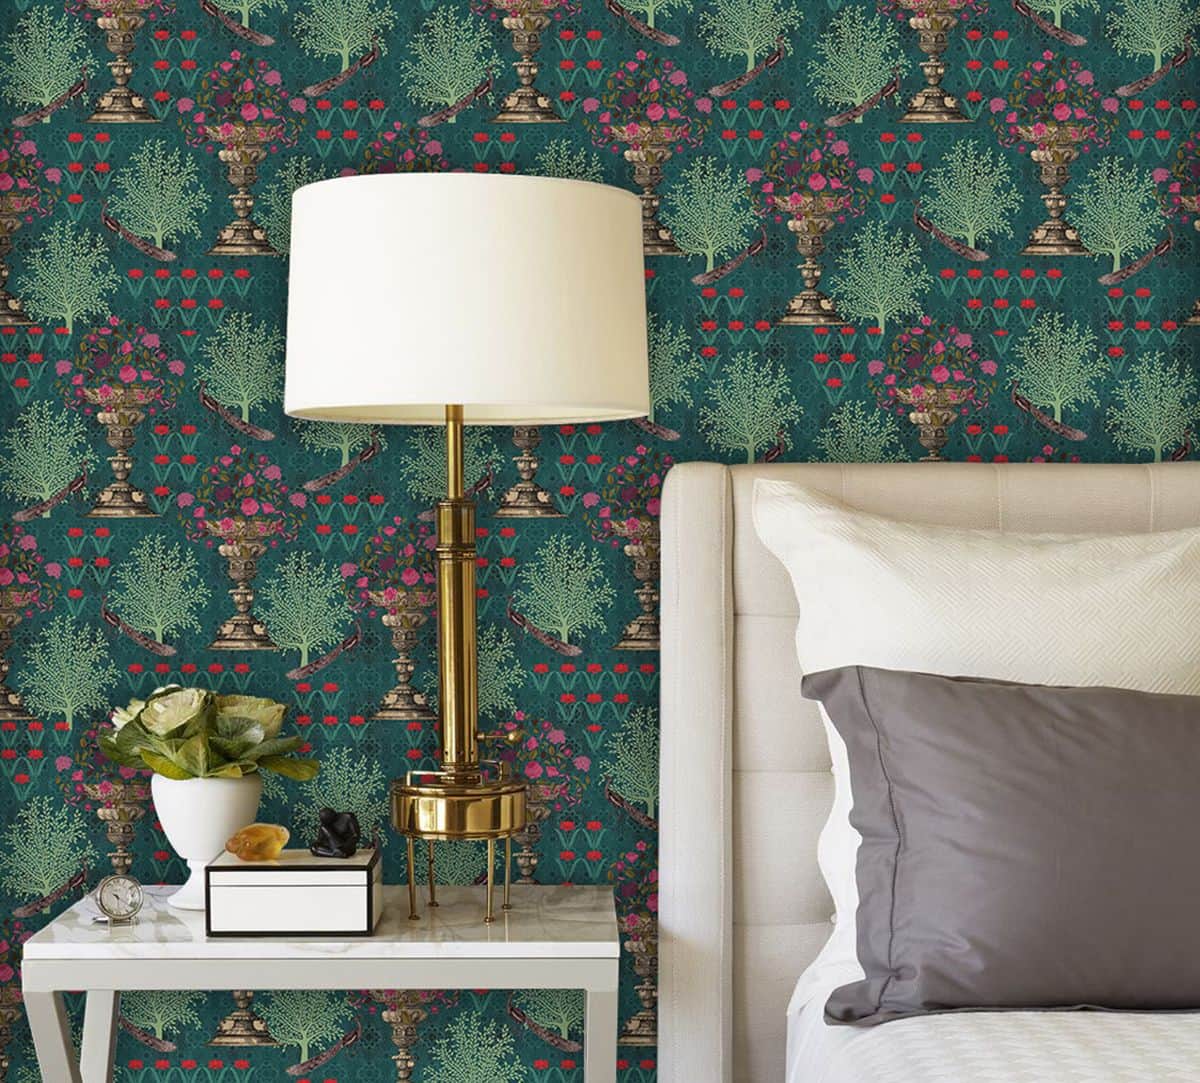 patterned backdrop overlaid with floral motifs and peacock prints, vibrant wallpaper with Indian appeal to your modern bedroom